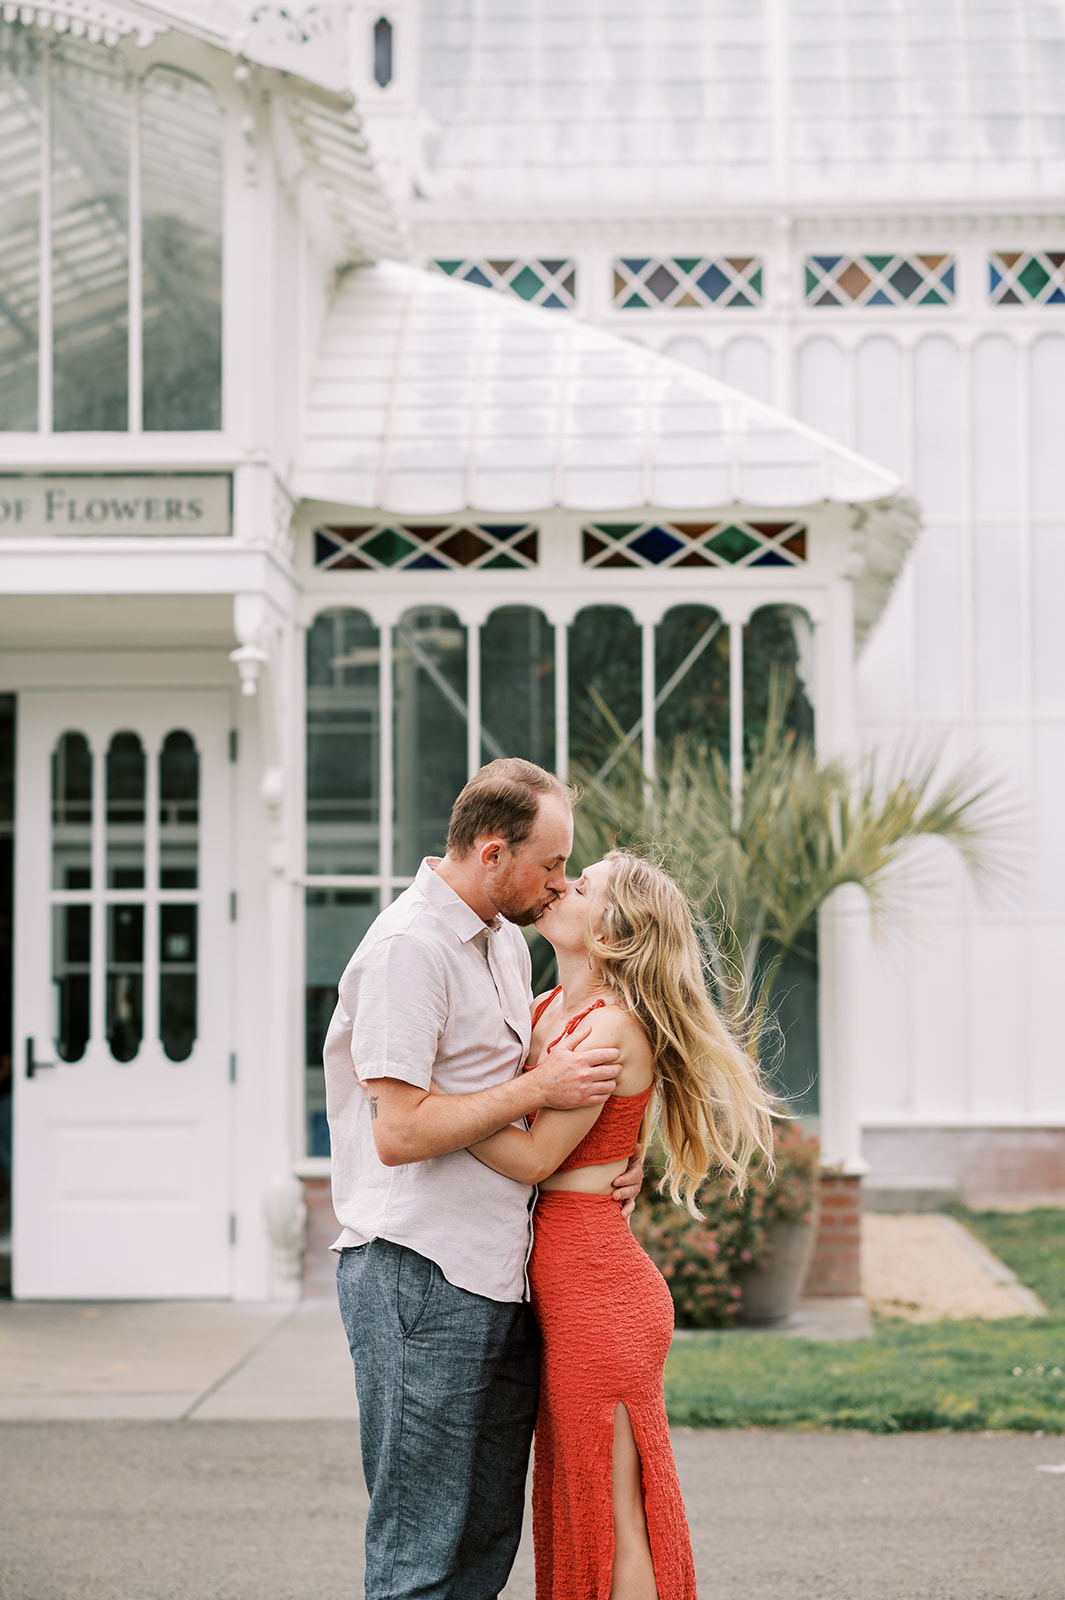 Tropical-inspired engagement session at San Francisco's Conservatory of flowers. 